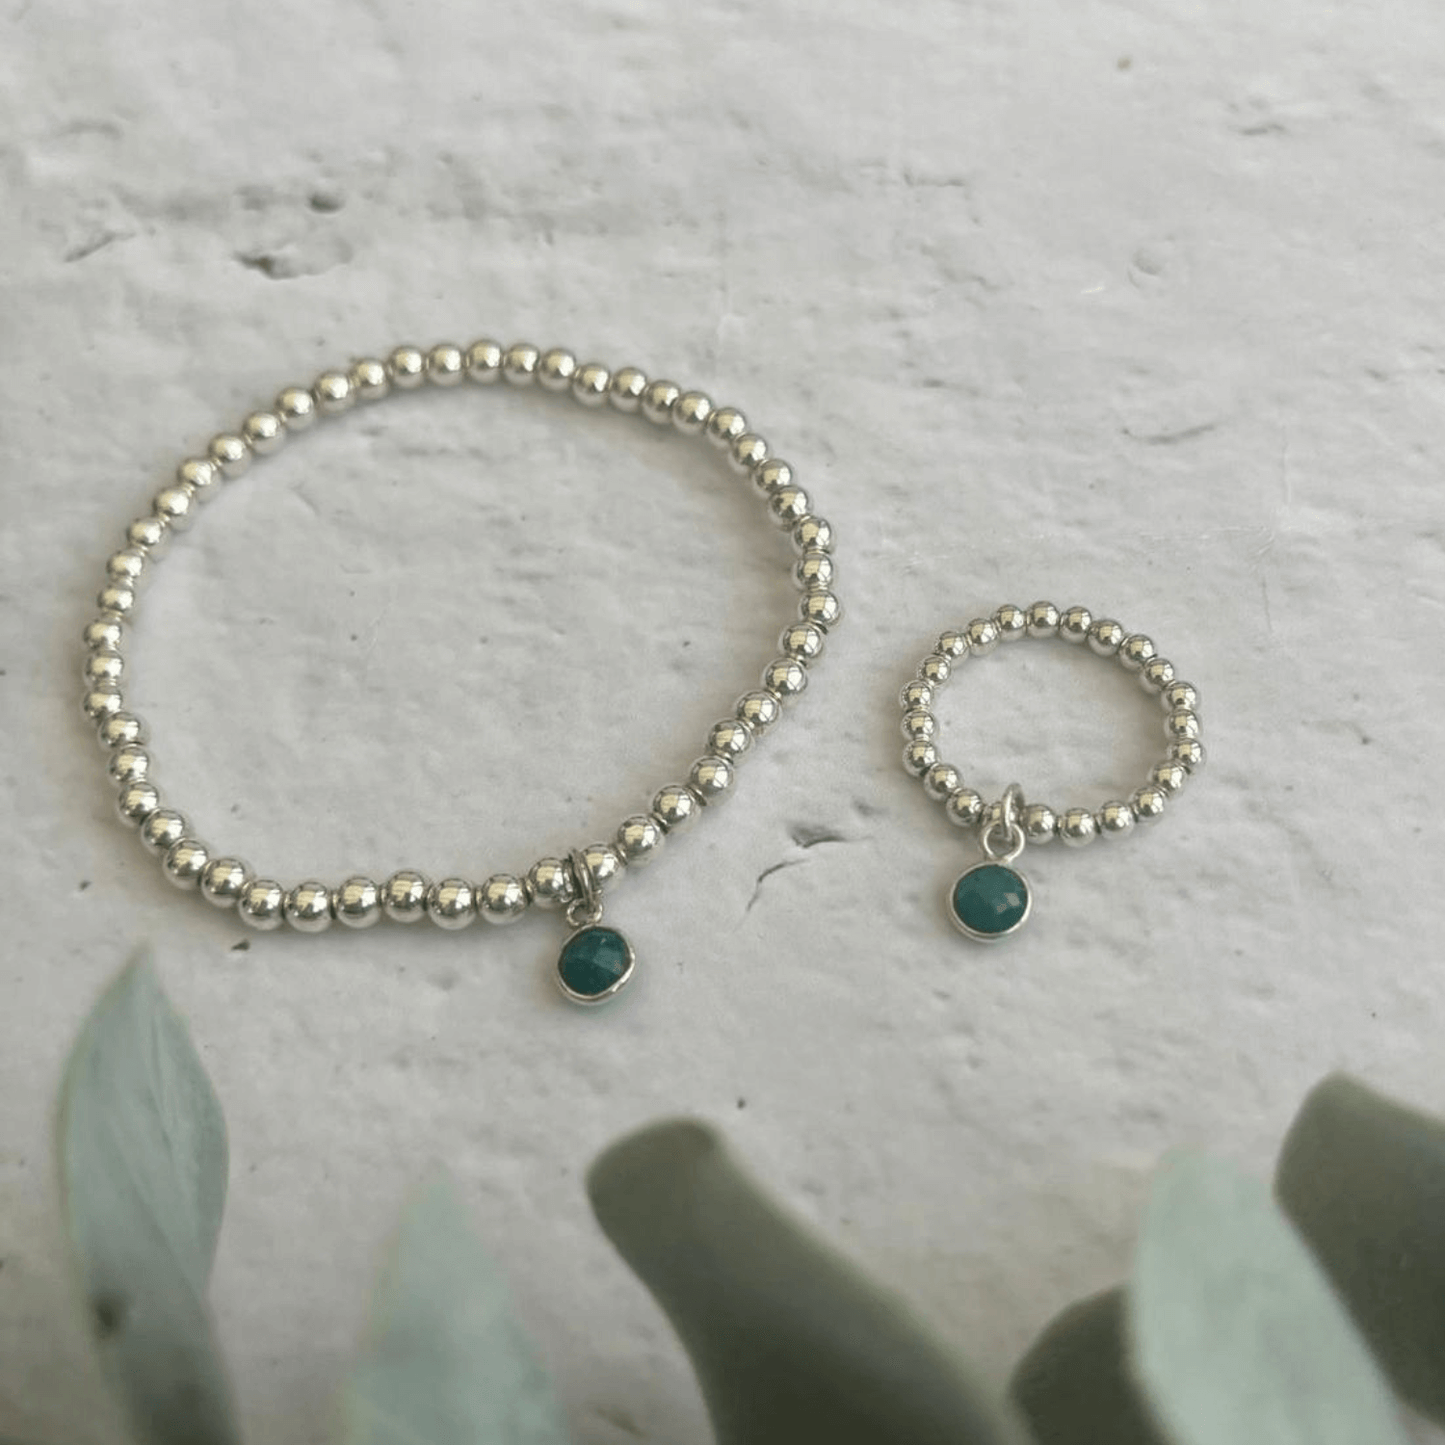 A silver beaded bracelet and matching ring from the Emerald Jewellery Sets by Made Here with Love, each adorned with a small green gemstone charm, are displayed on a gray textured surface. Green leaves are slightly blurred in the foreground, adding a touch of natural elements to the image.